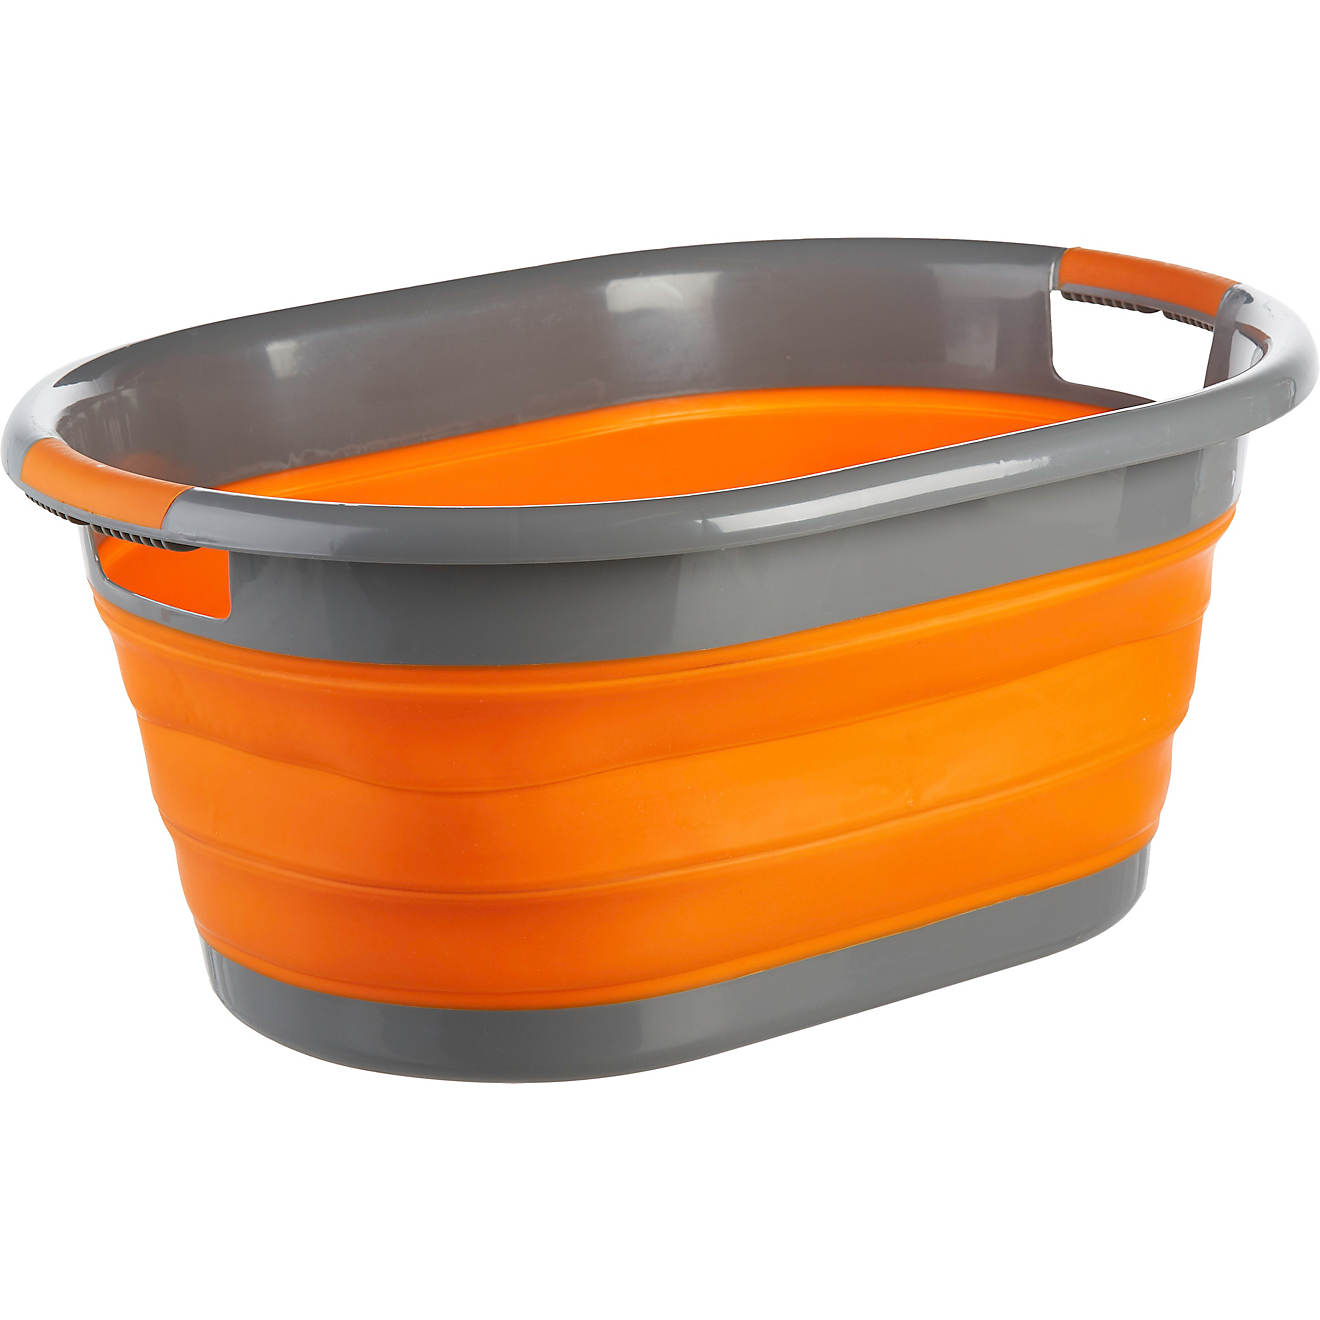 Details about   UST FLEXWARE TUB ORANGE COLOR CAPACITY 9.7 GAL BRAND NEW.